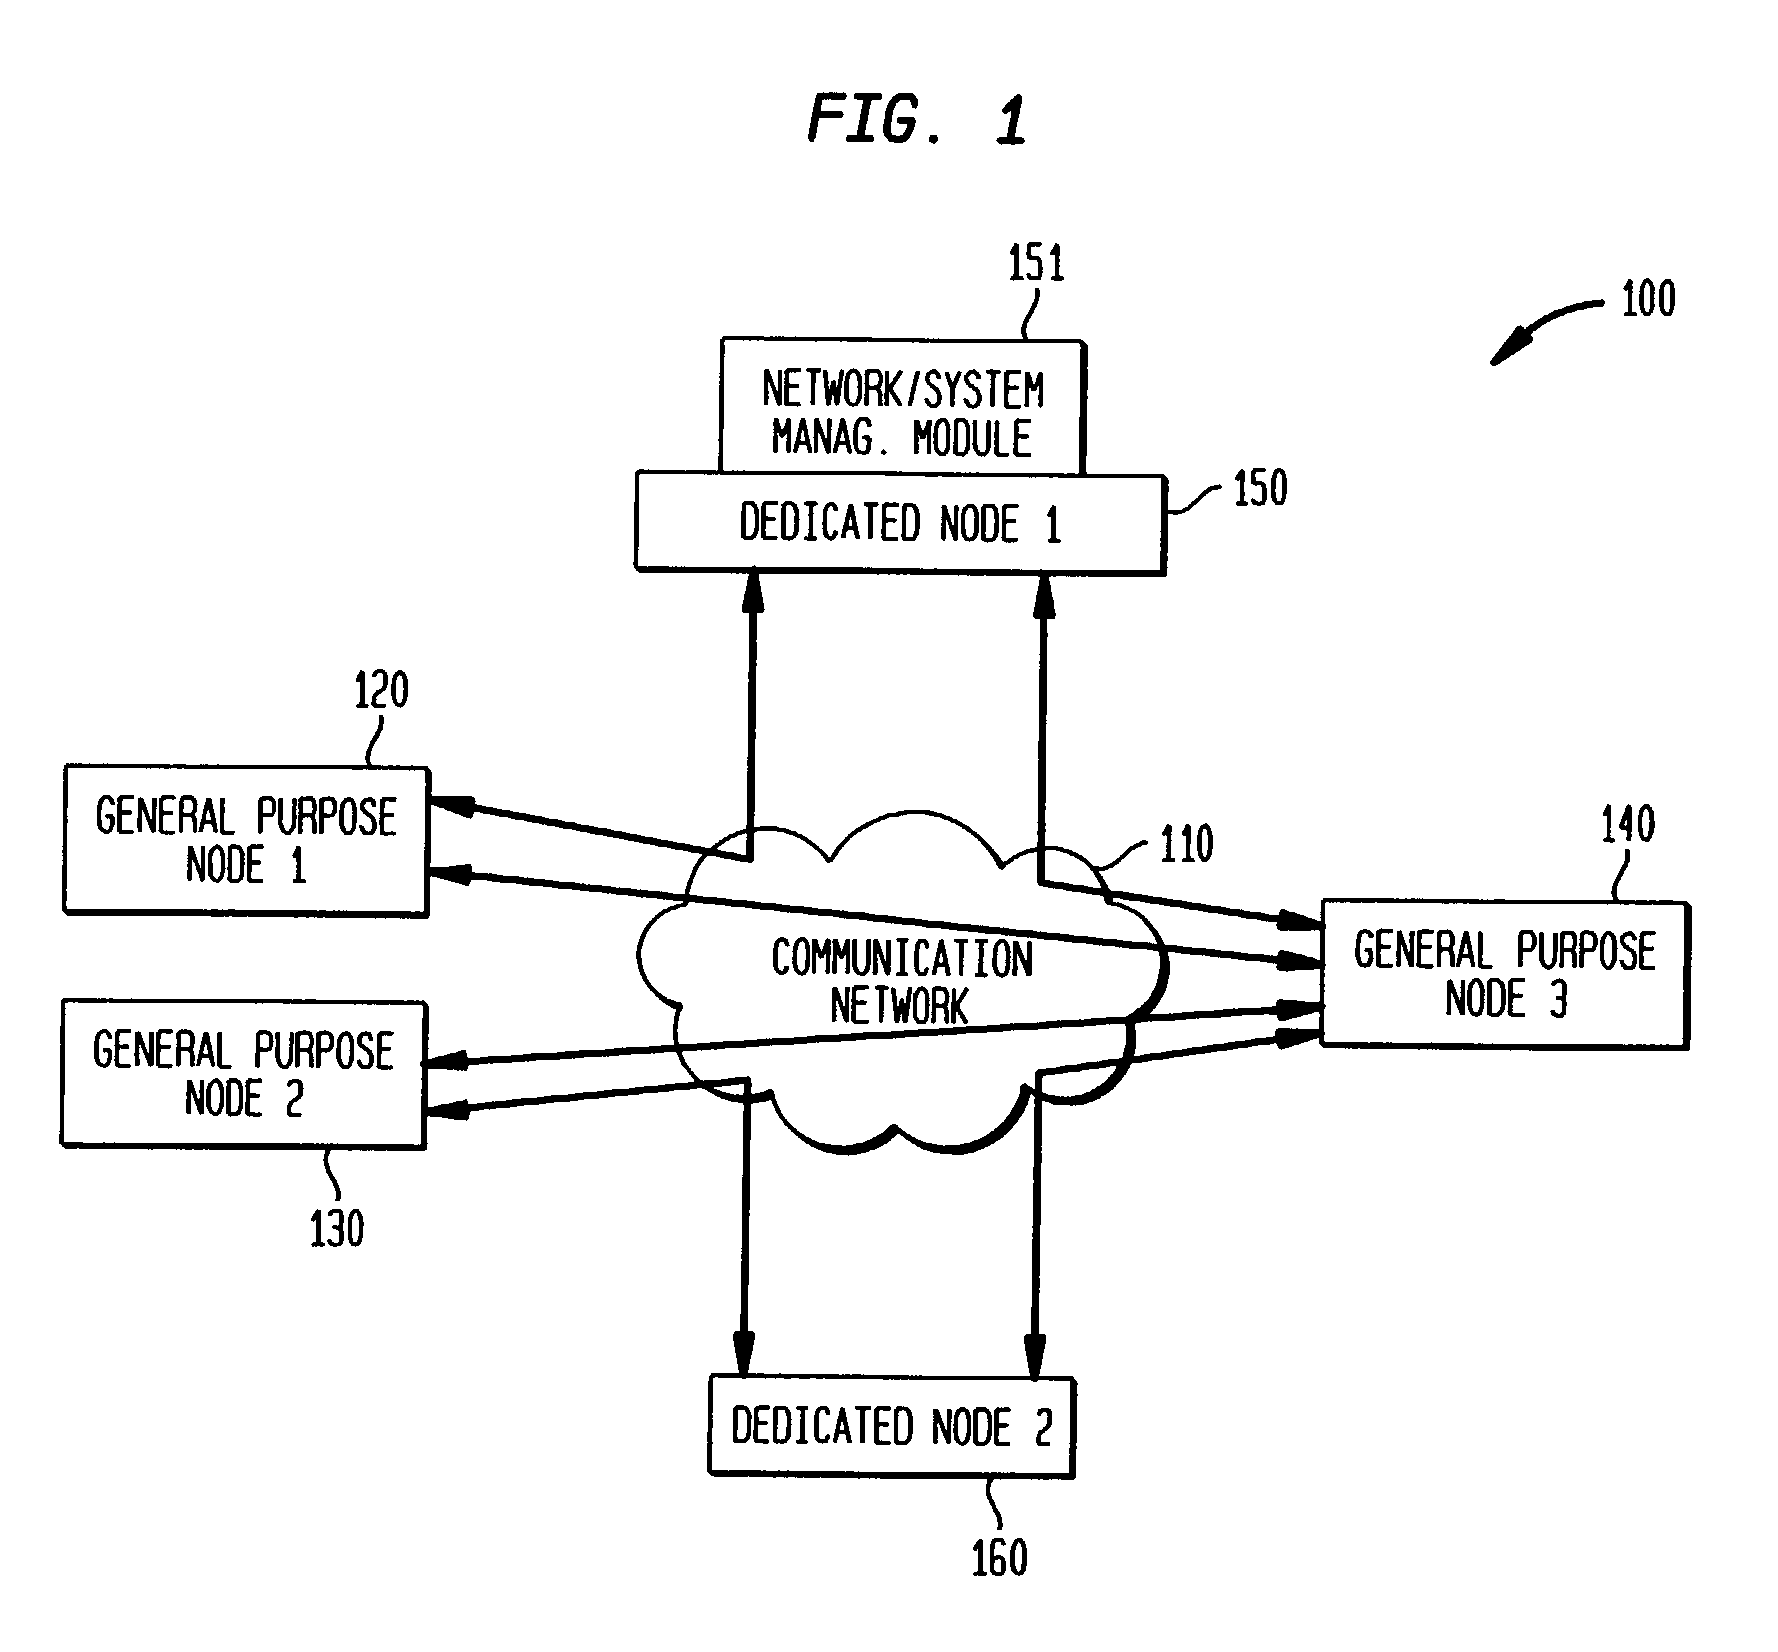 Method and system of configuring elements of a distributed computing system for optimized value